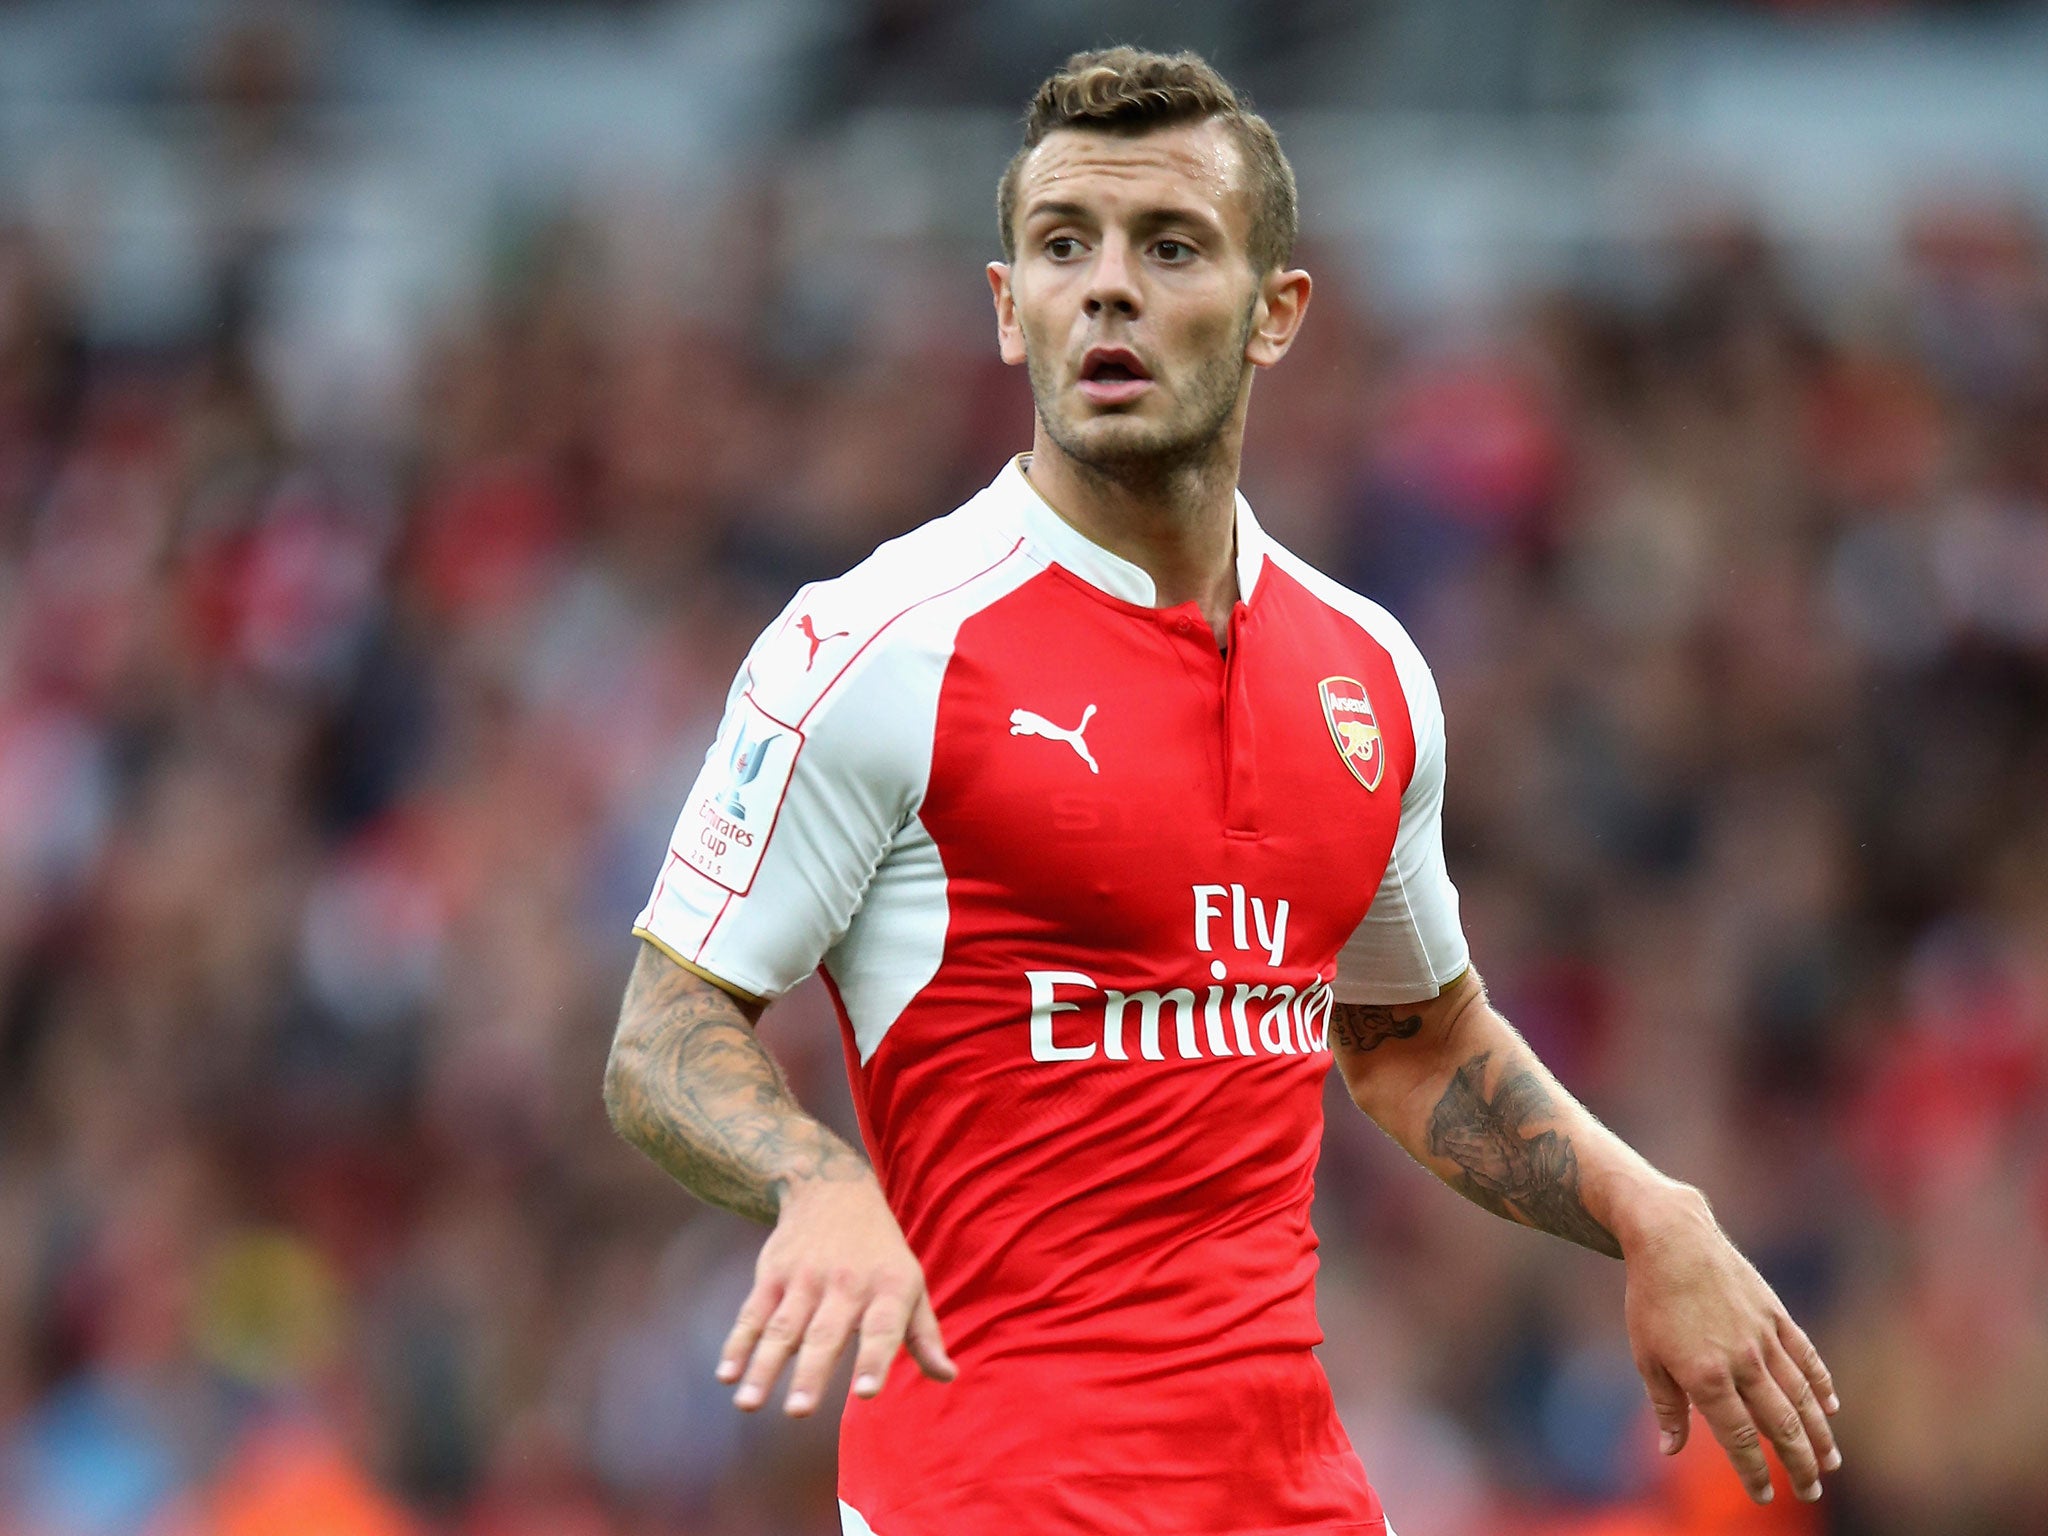 Jack Wilshere is set to return after fracturing his fibula